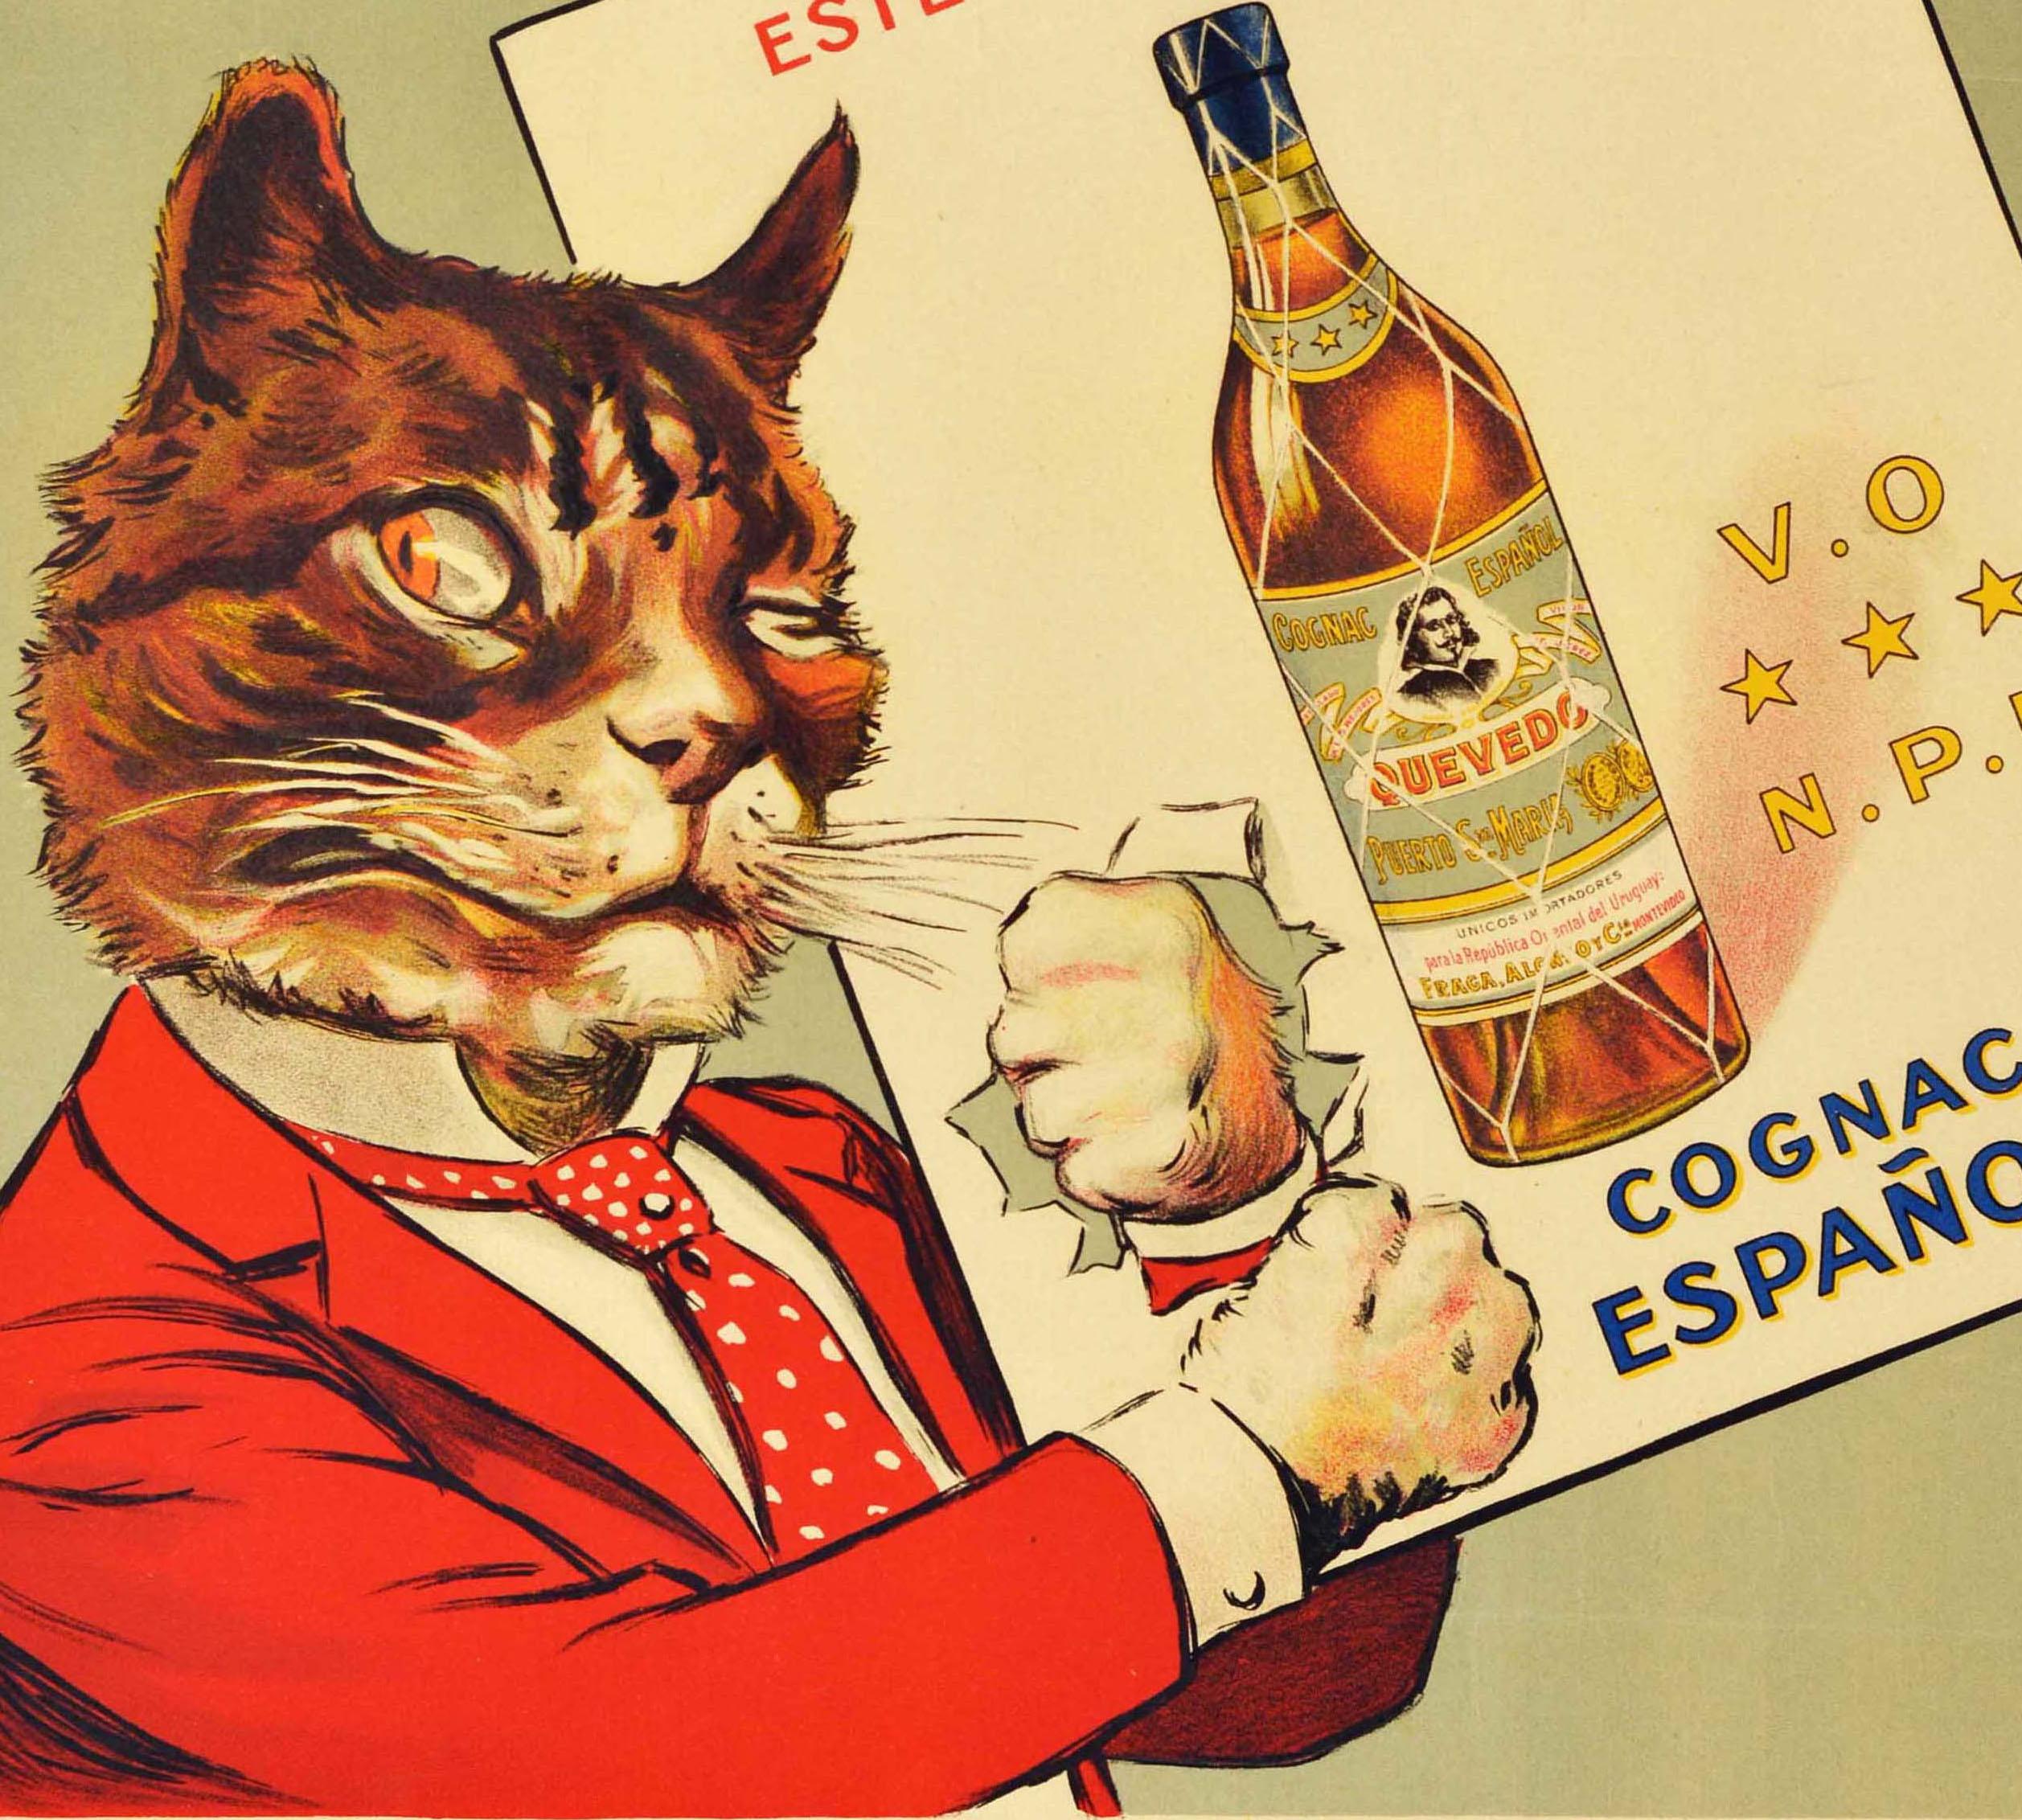 Original antique drink advertising poster for Quevedo Cognac Espanol featuring a fun illustration of dapper cat in a smart red suit and red and white polka dot tie winking at the viewer as he punches through a paper showing a bottle of the cognac